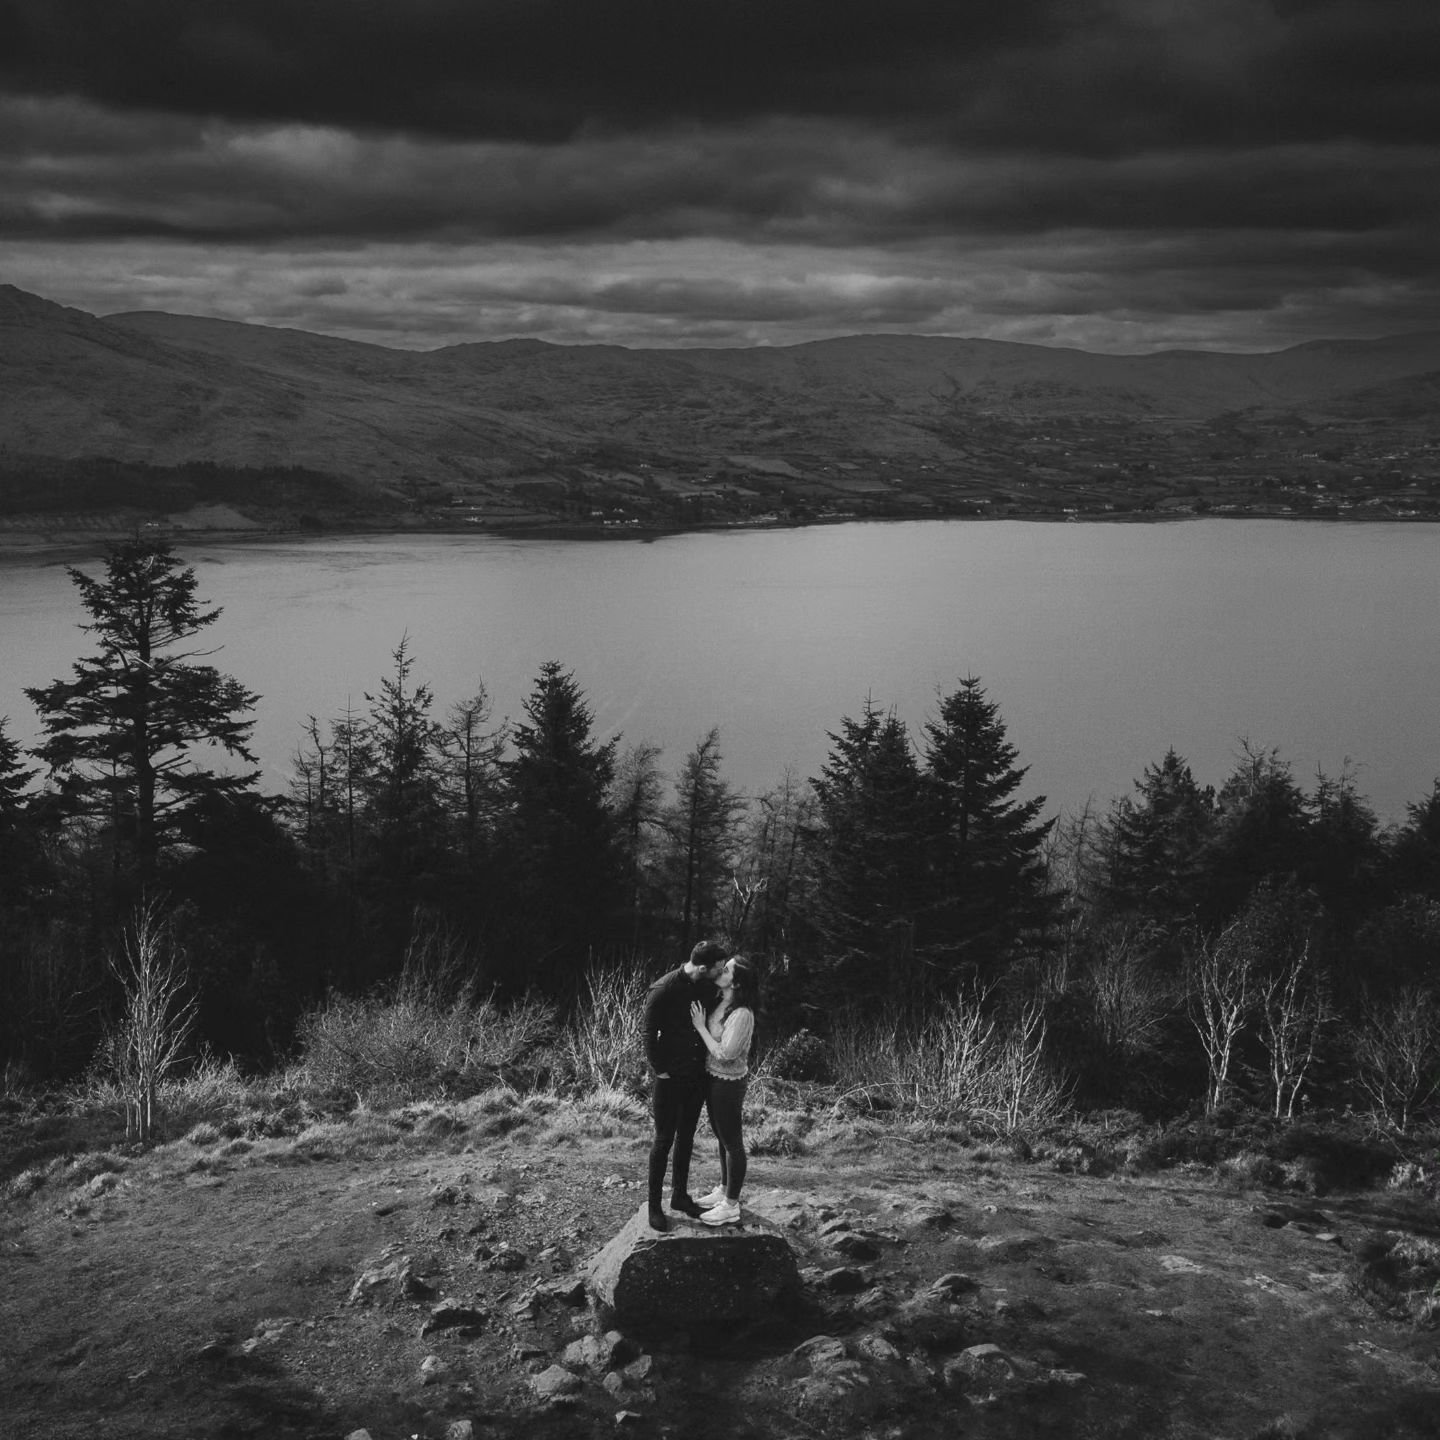 The wedding will be epic as this photo

#engagementphotos #engagement #wedding #niweddingsuppliers #niweddingphotographer #niweddings #belfastweddingphotographer #irishweddingphotographer #irishwedding #irishweddings #ireland #irelandweddingphotograp